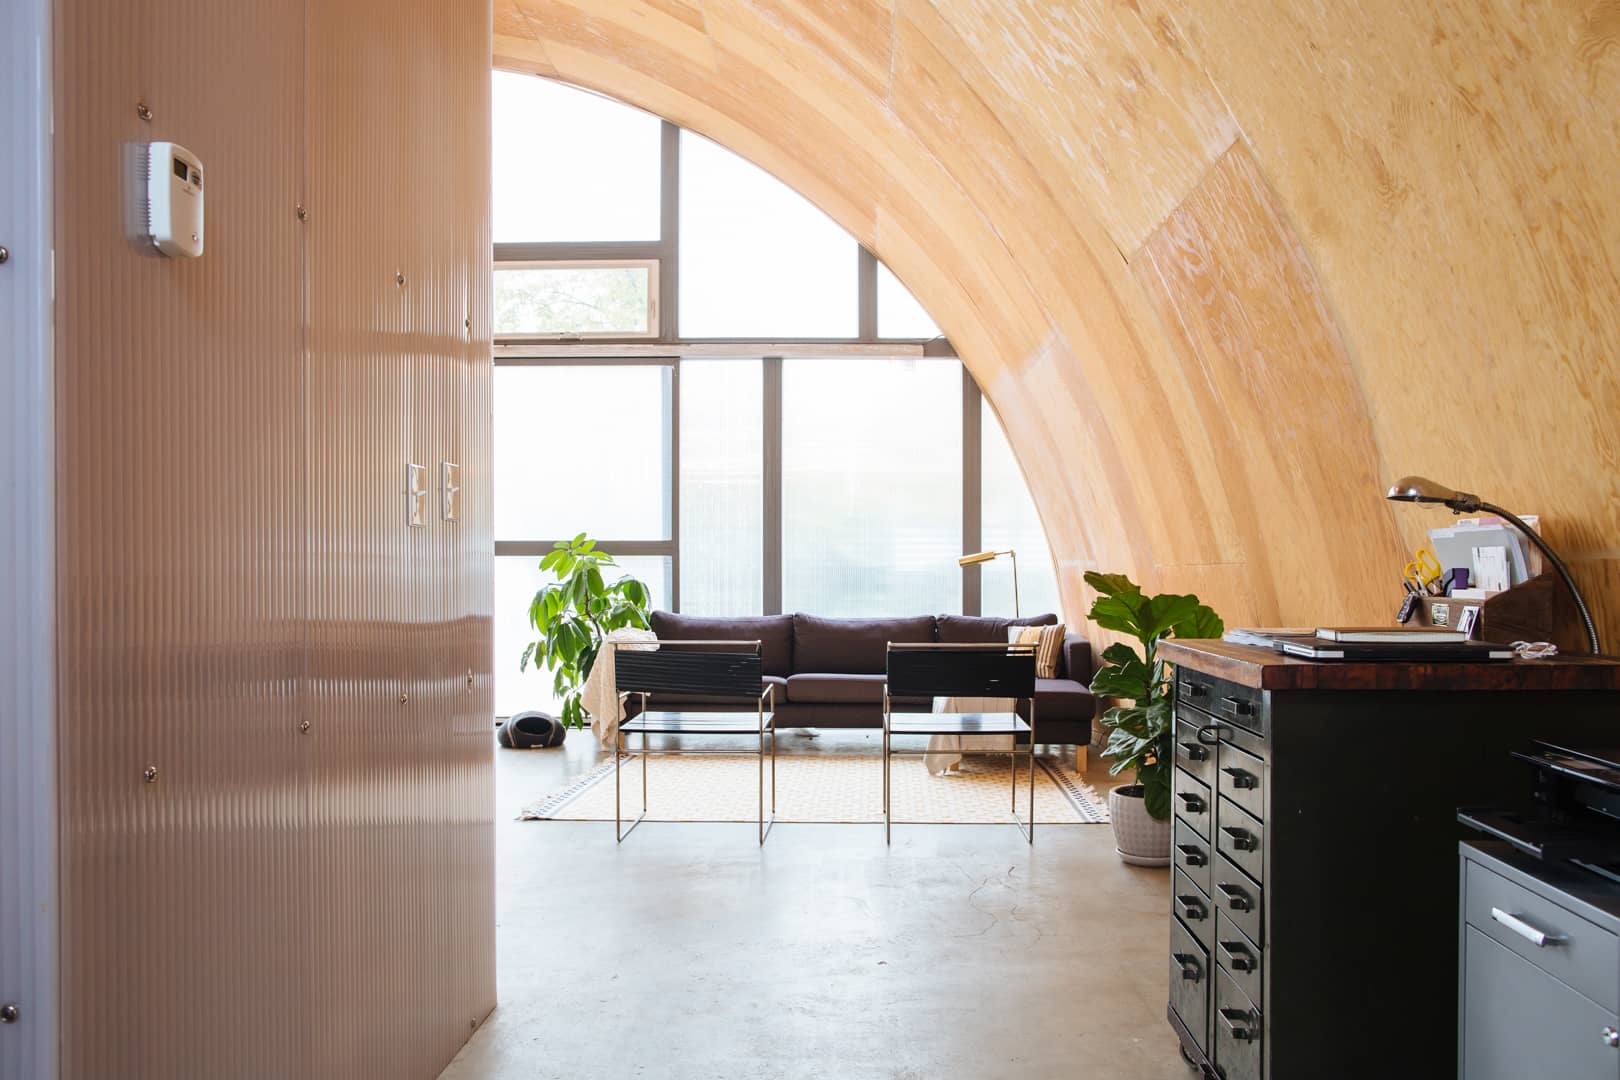 House Tour: A Modern, Minimal Quonset Hut Detroit Home | Apartment Therapy